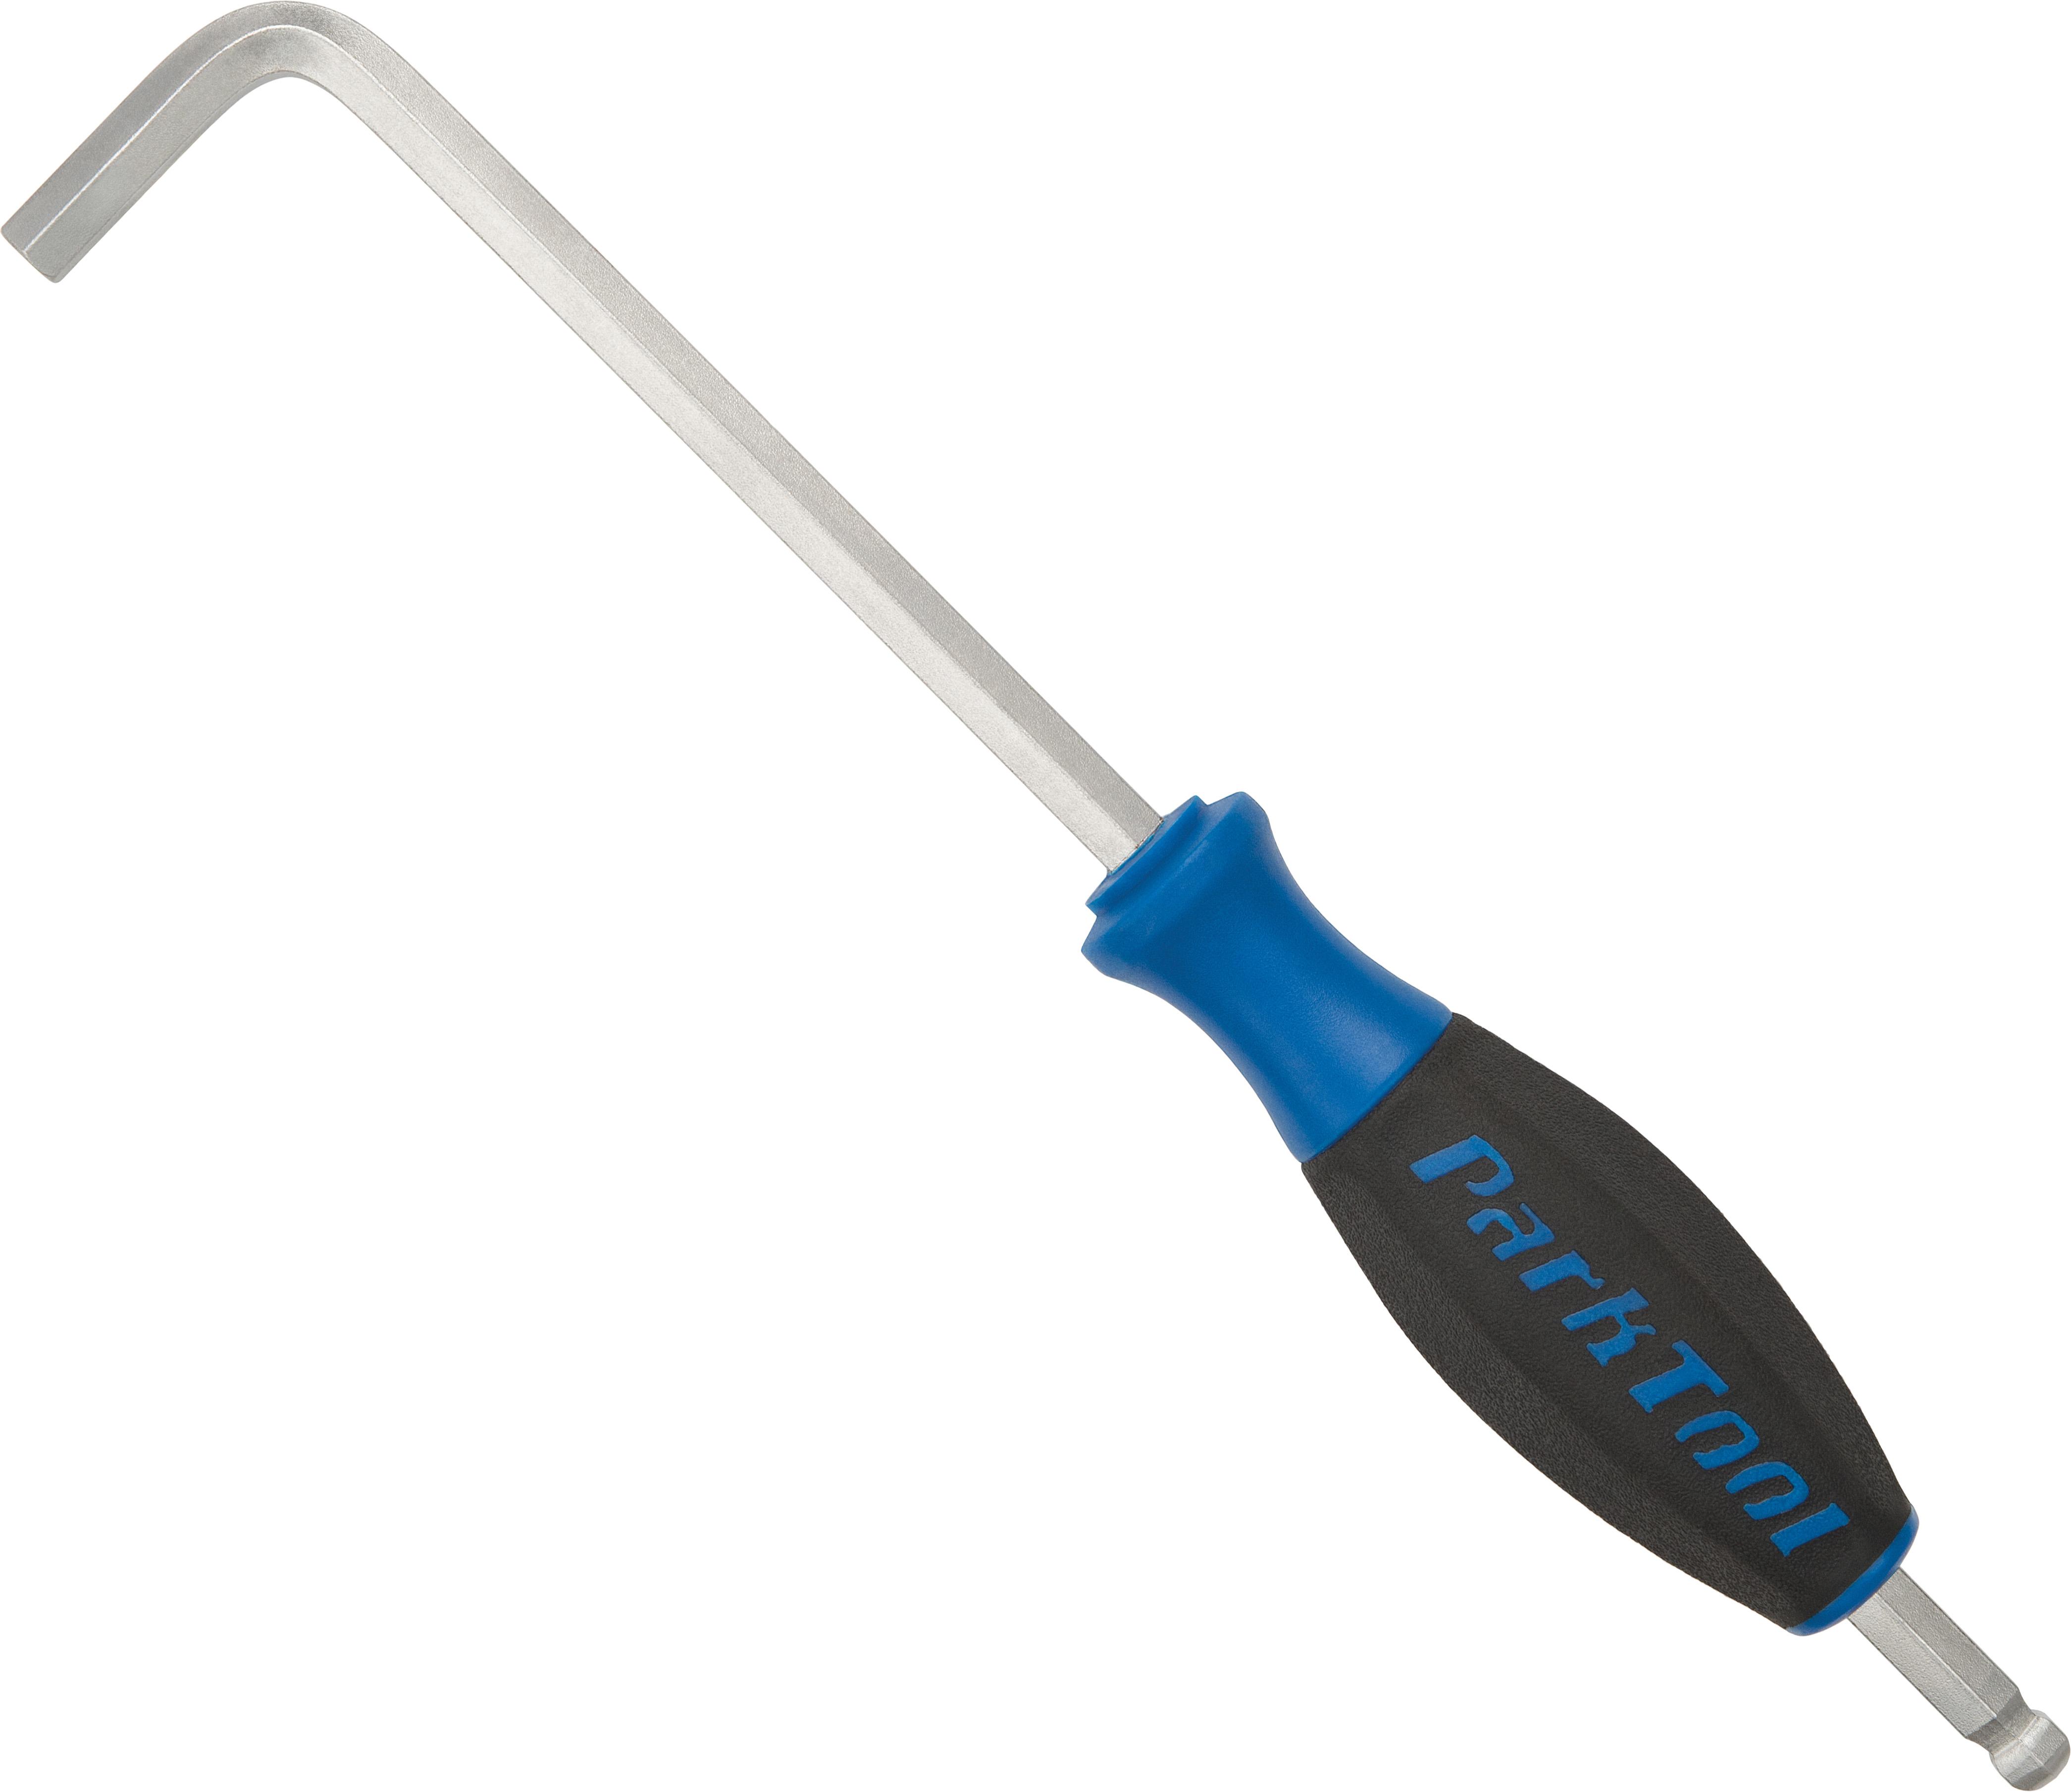 Park Tool Hex Wrench Ht - Blue/black